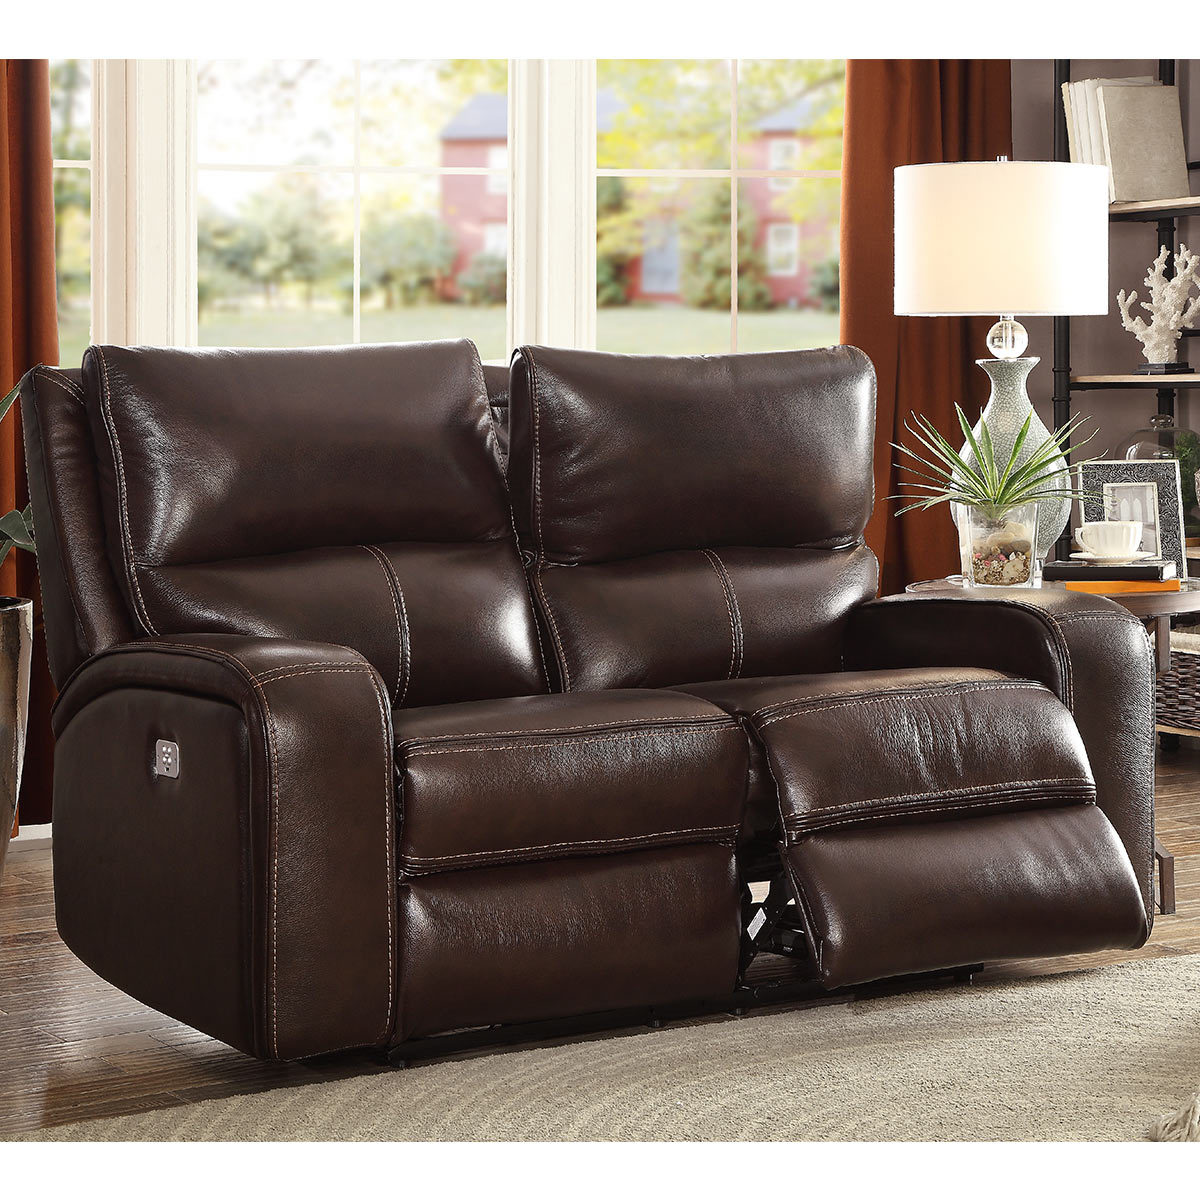 Zach 2 Seater Brown Leather Power Recliner Sofa Costco UK